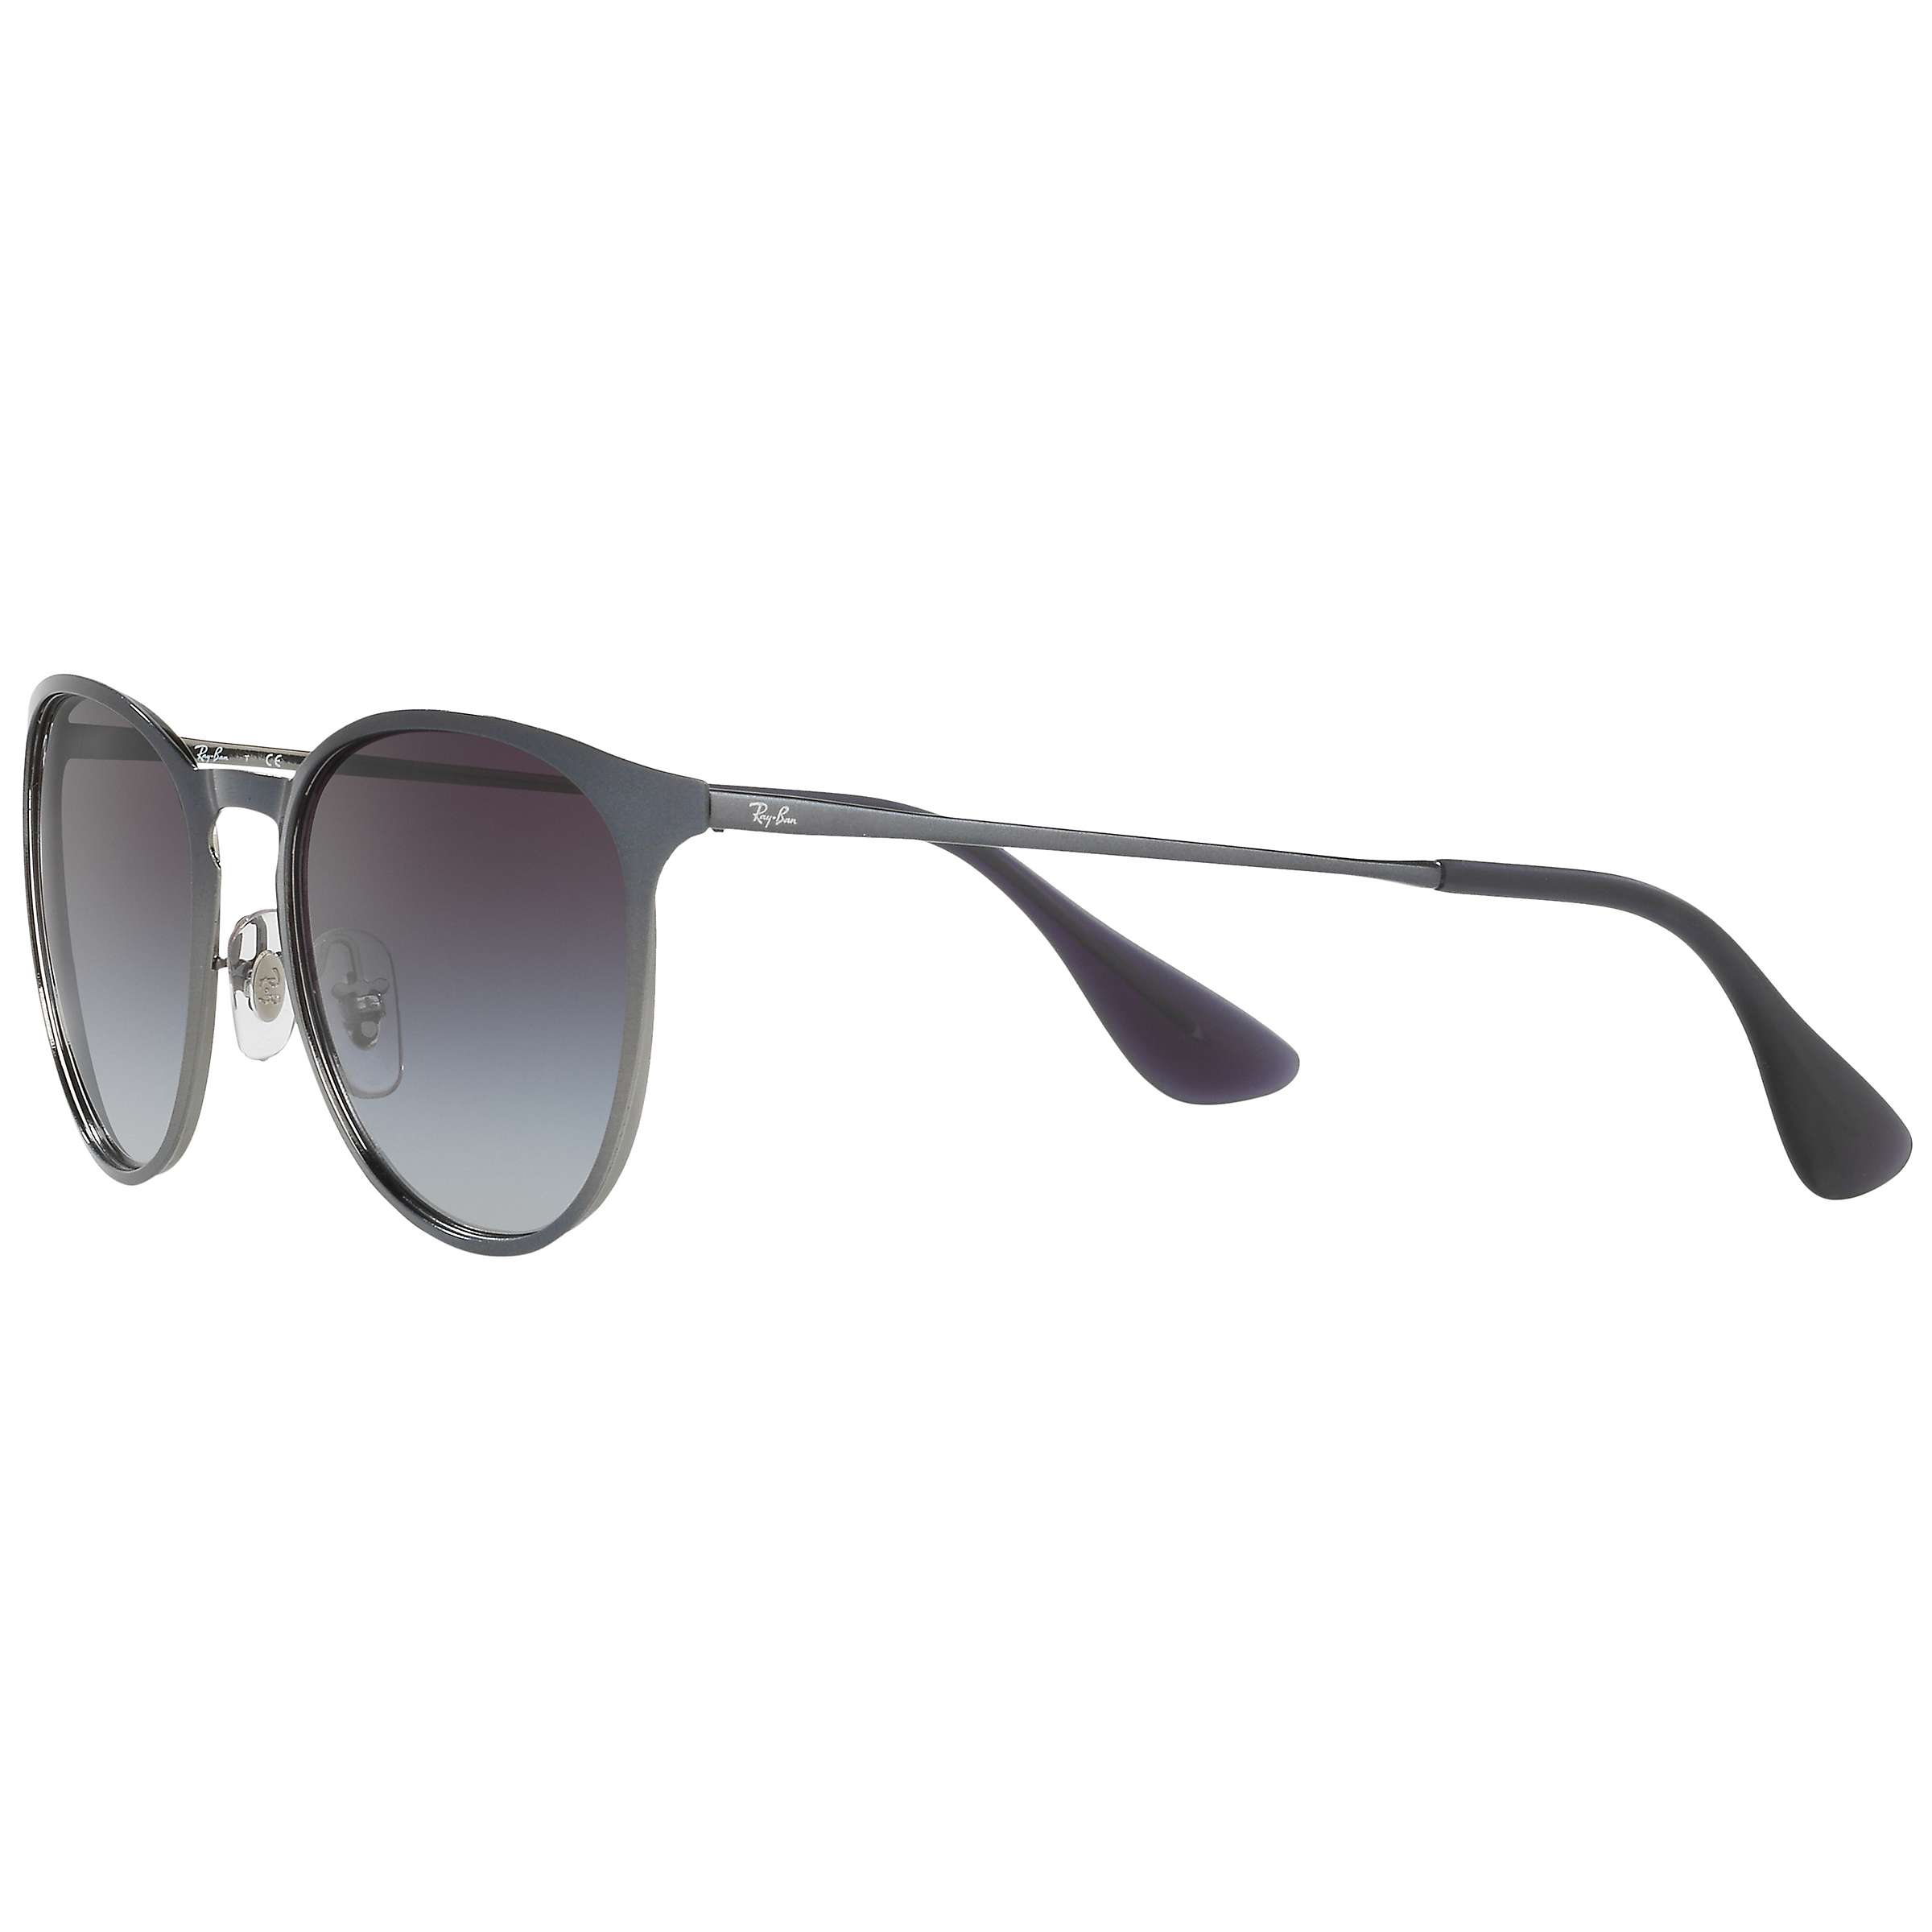 Buy Ray-Ban RB3539 Erika Oval Sunglasses Online at johnlewis.com